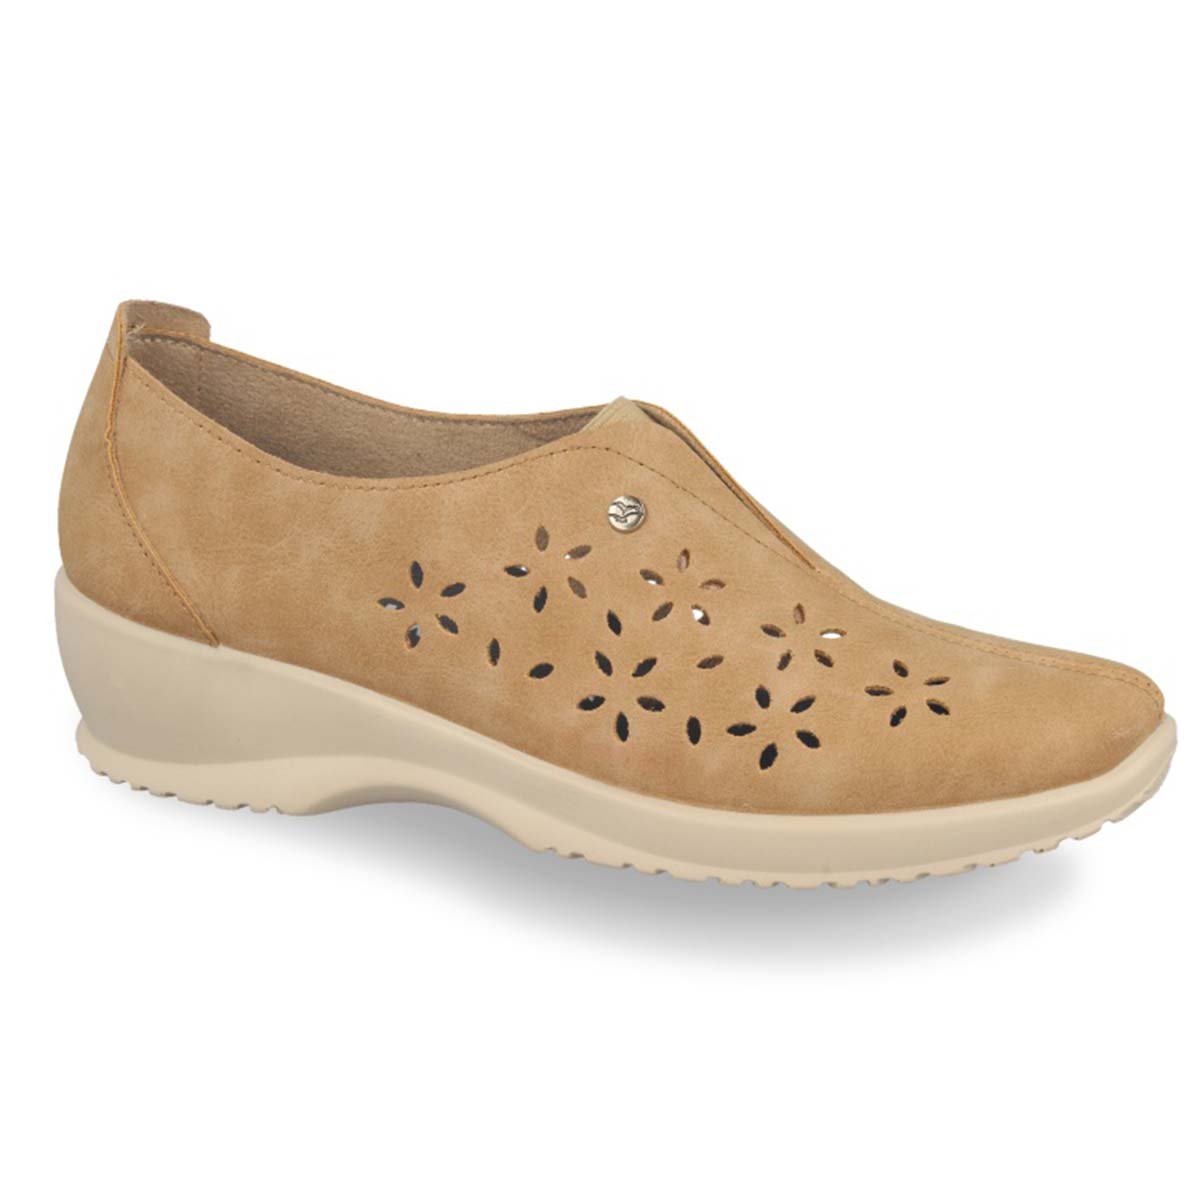 See photos Synthetic Woman Shoe Beige (17A91C5)